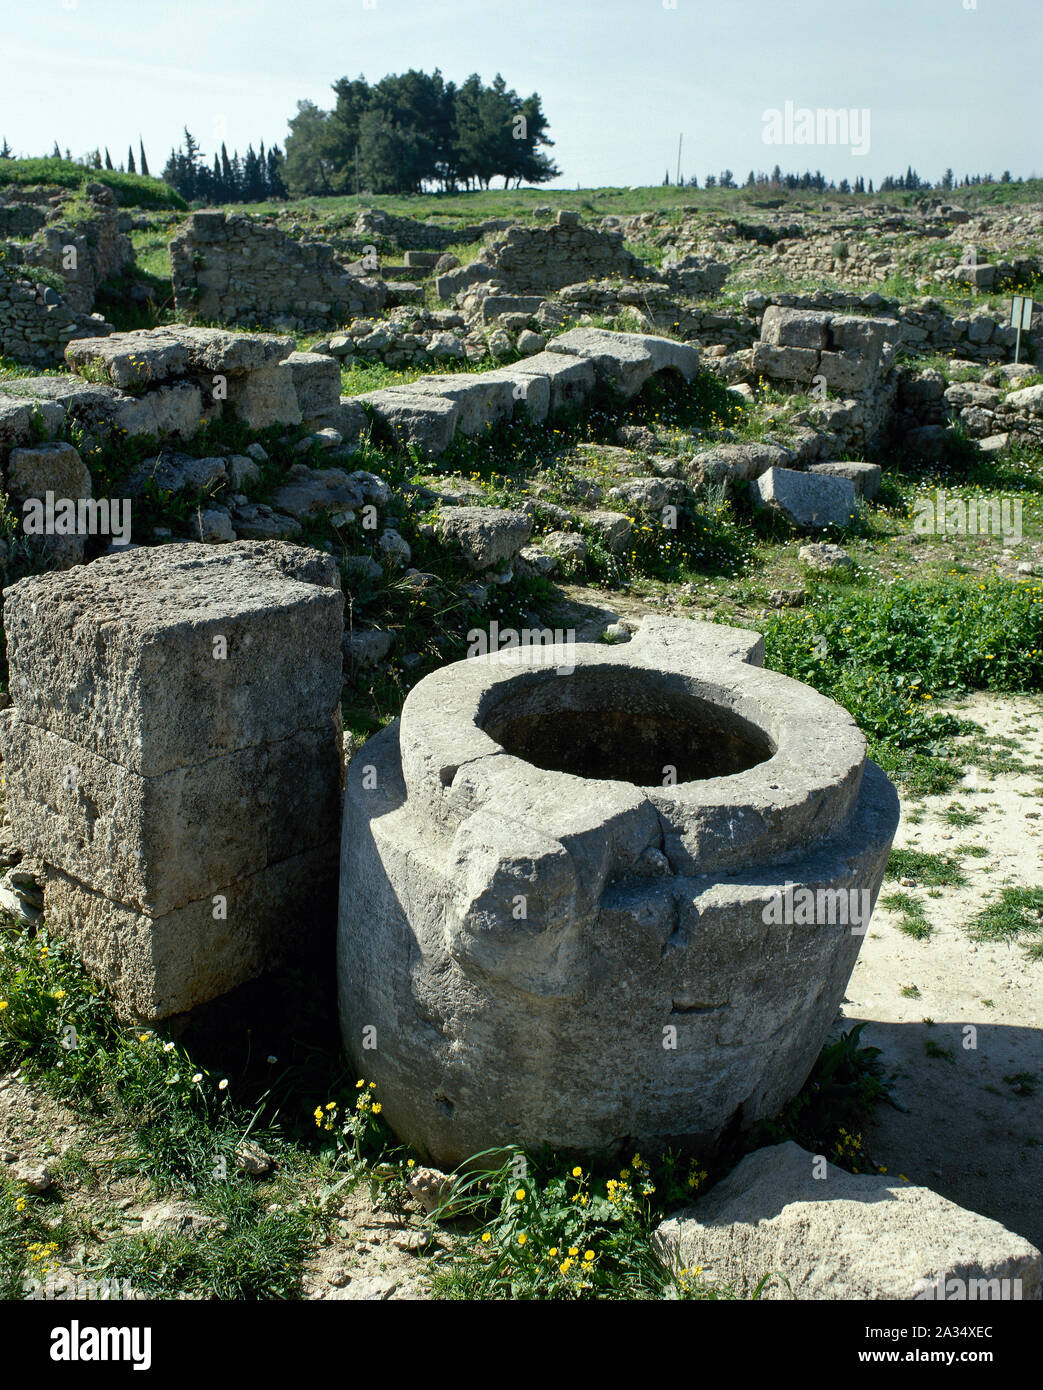 Syria. Ancient Near East. Phoenicians. Ugarit (Ras Shamra). Ancient city, founded in 6000BC and abandoned in 1190 BC. Ruins. View of a well. (Photo taken before the Syrian Civil War). Stock Photo